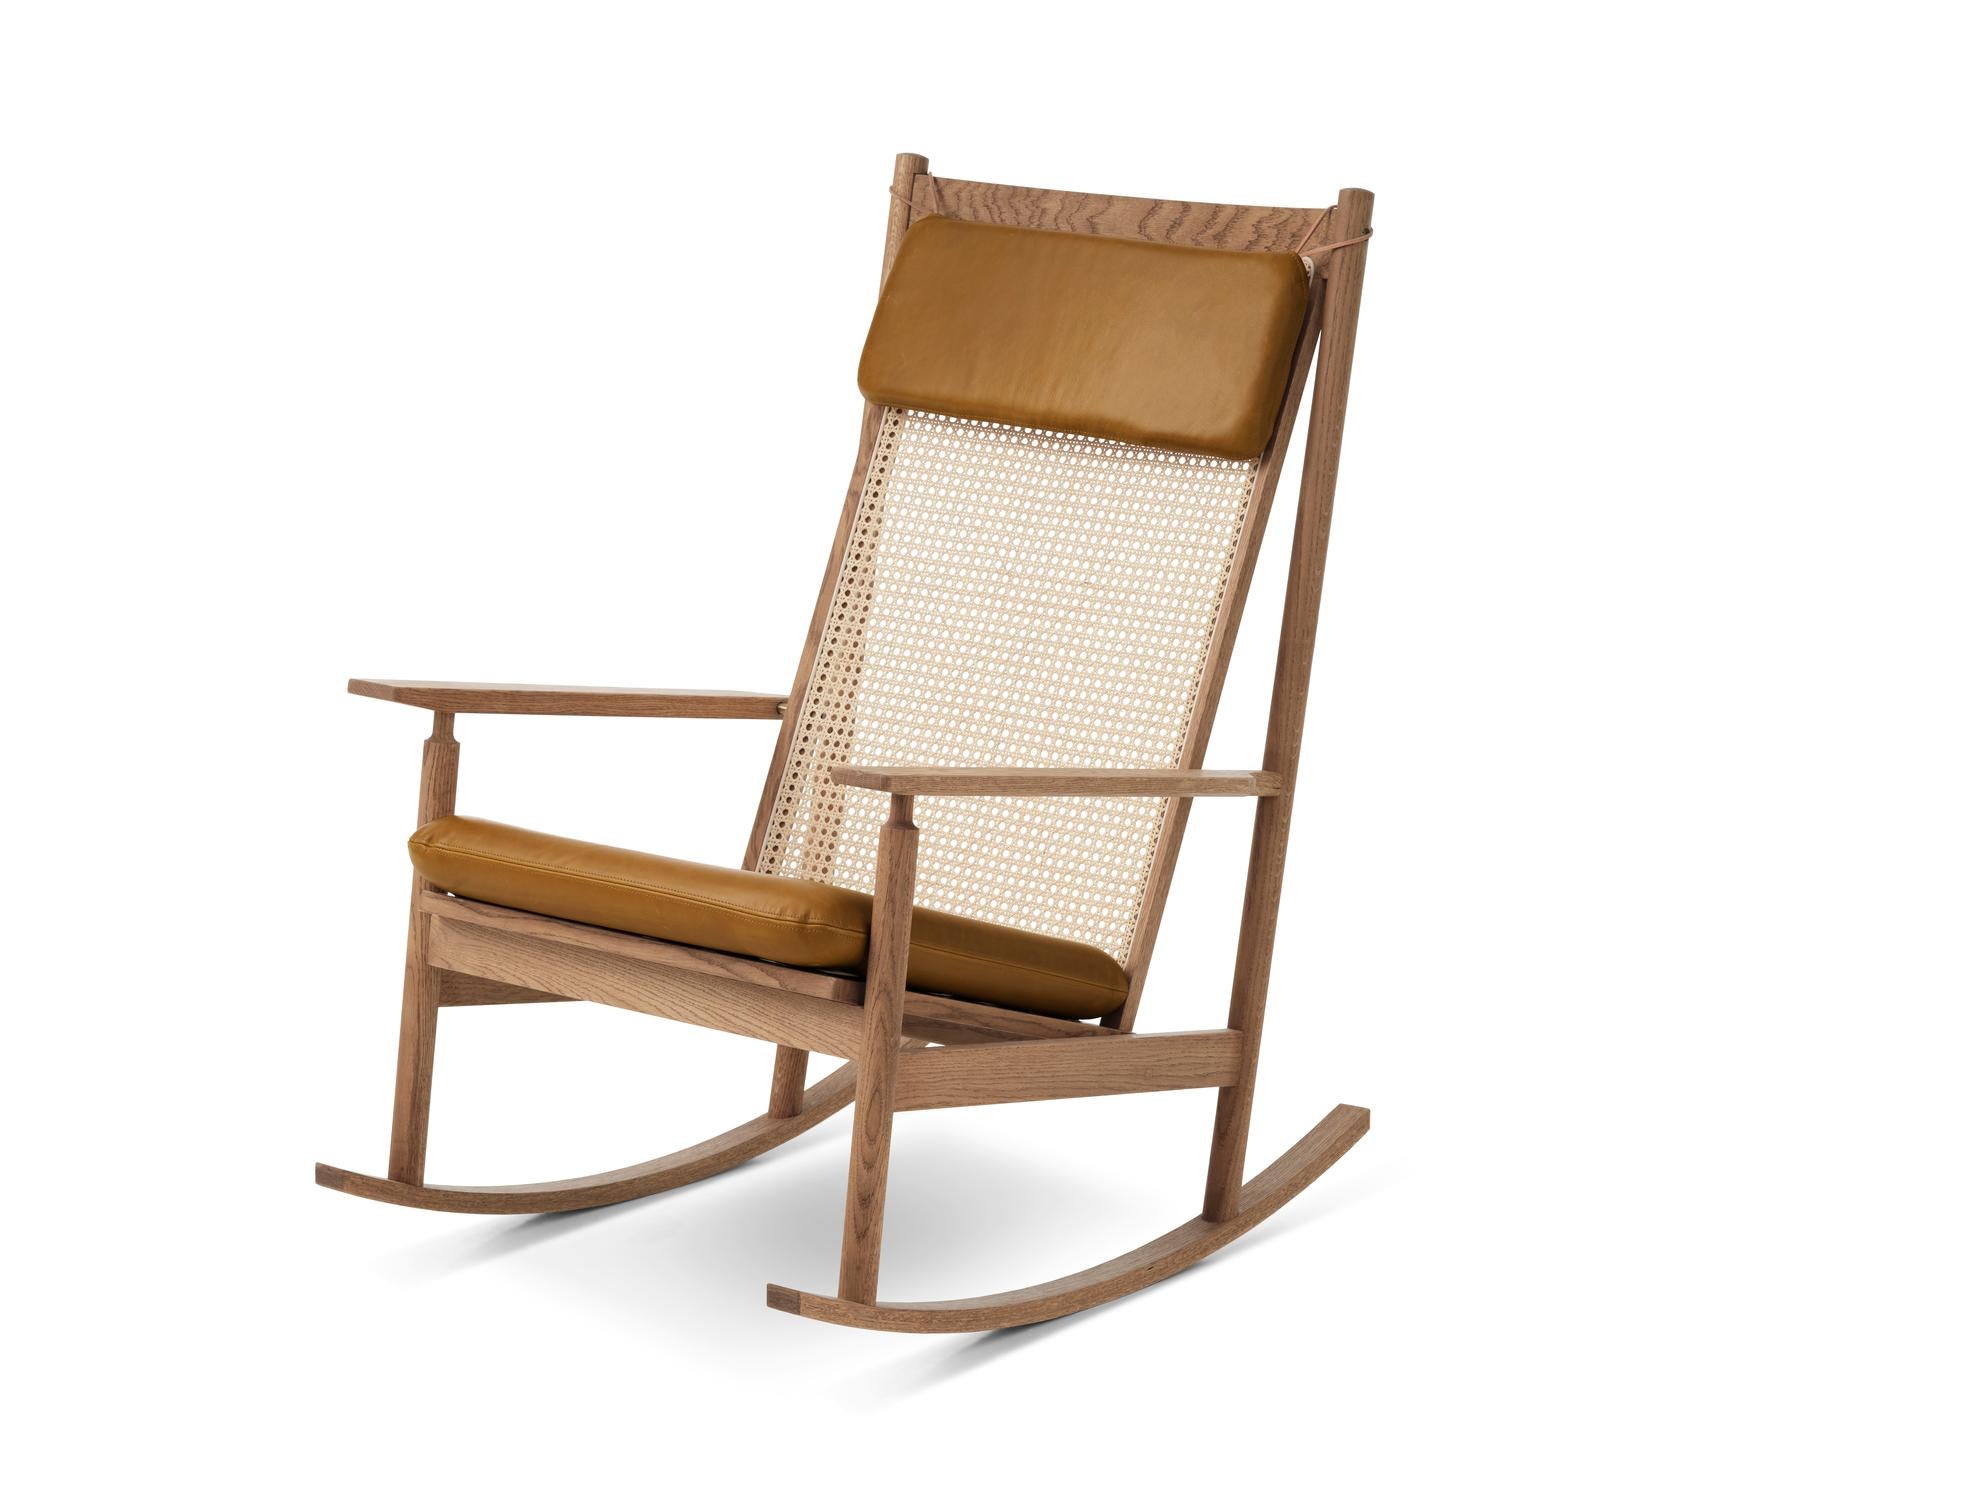 Swing rocking chair nevada teak cognac by Warm Nordic
Dimensions: D91 x W68 x H 103 cm
Material: Wood, Foam, Rubber springs, French cane, Textile or leather upholstery, Teak
Weight: 16.5 kg
Also available in different colours, materials and